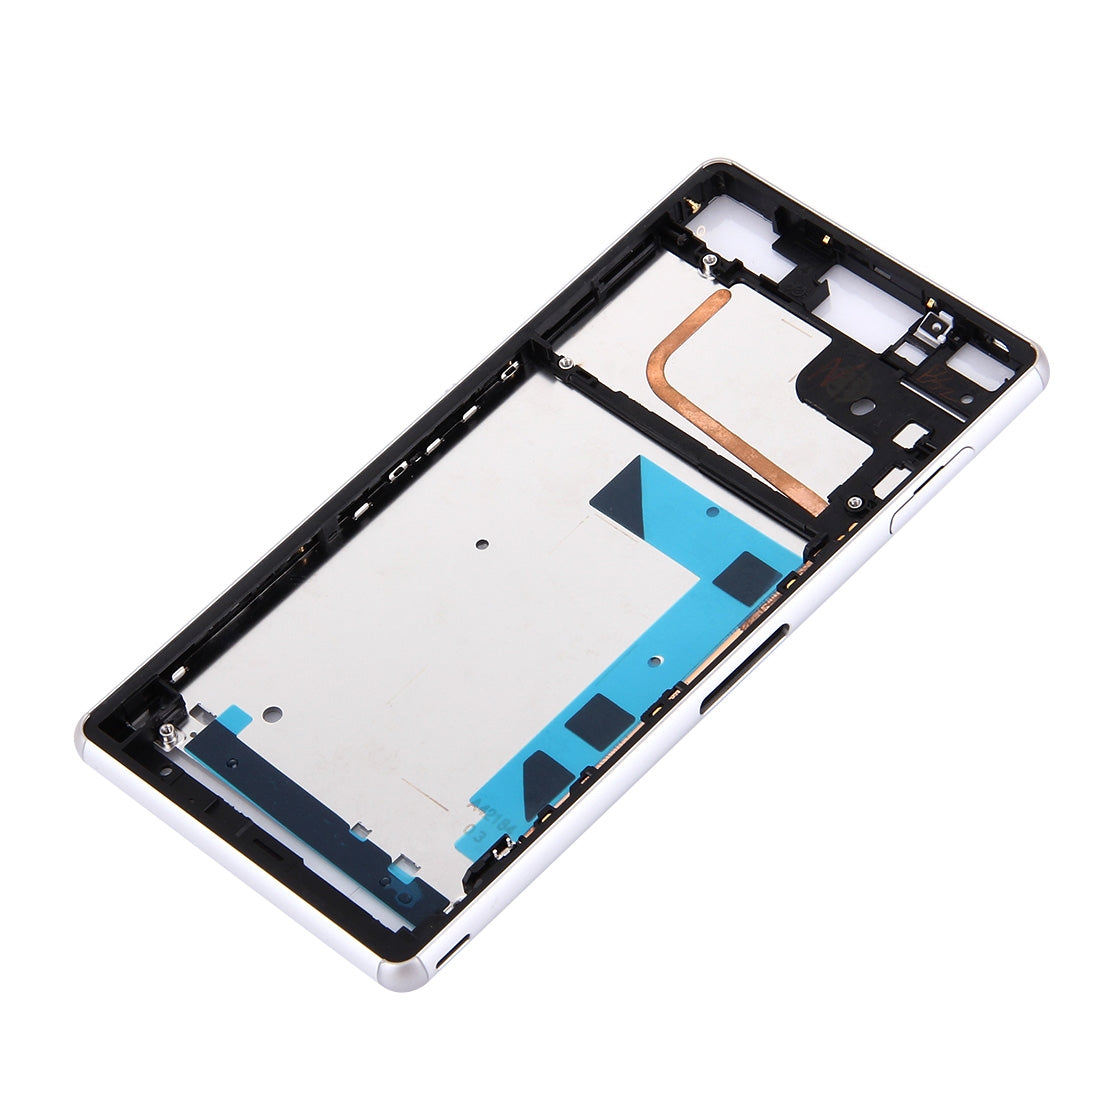 Chassis Intermediate Frame LCD Sony Xperia Z3 / L55w / D6603 White